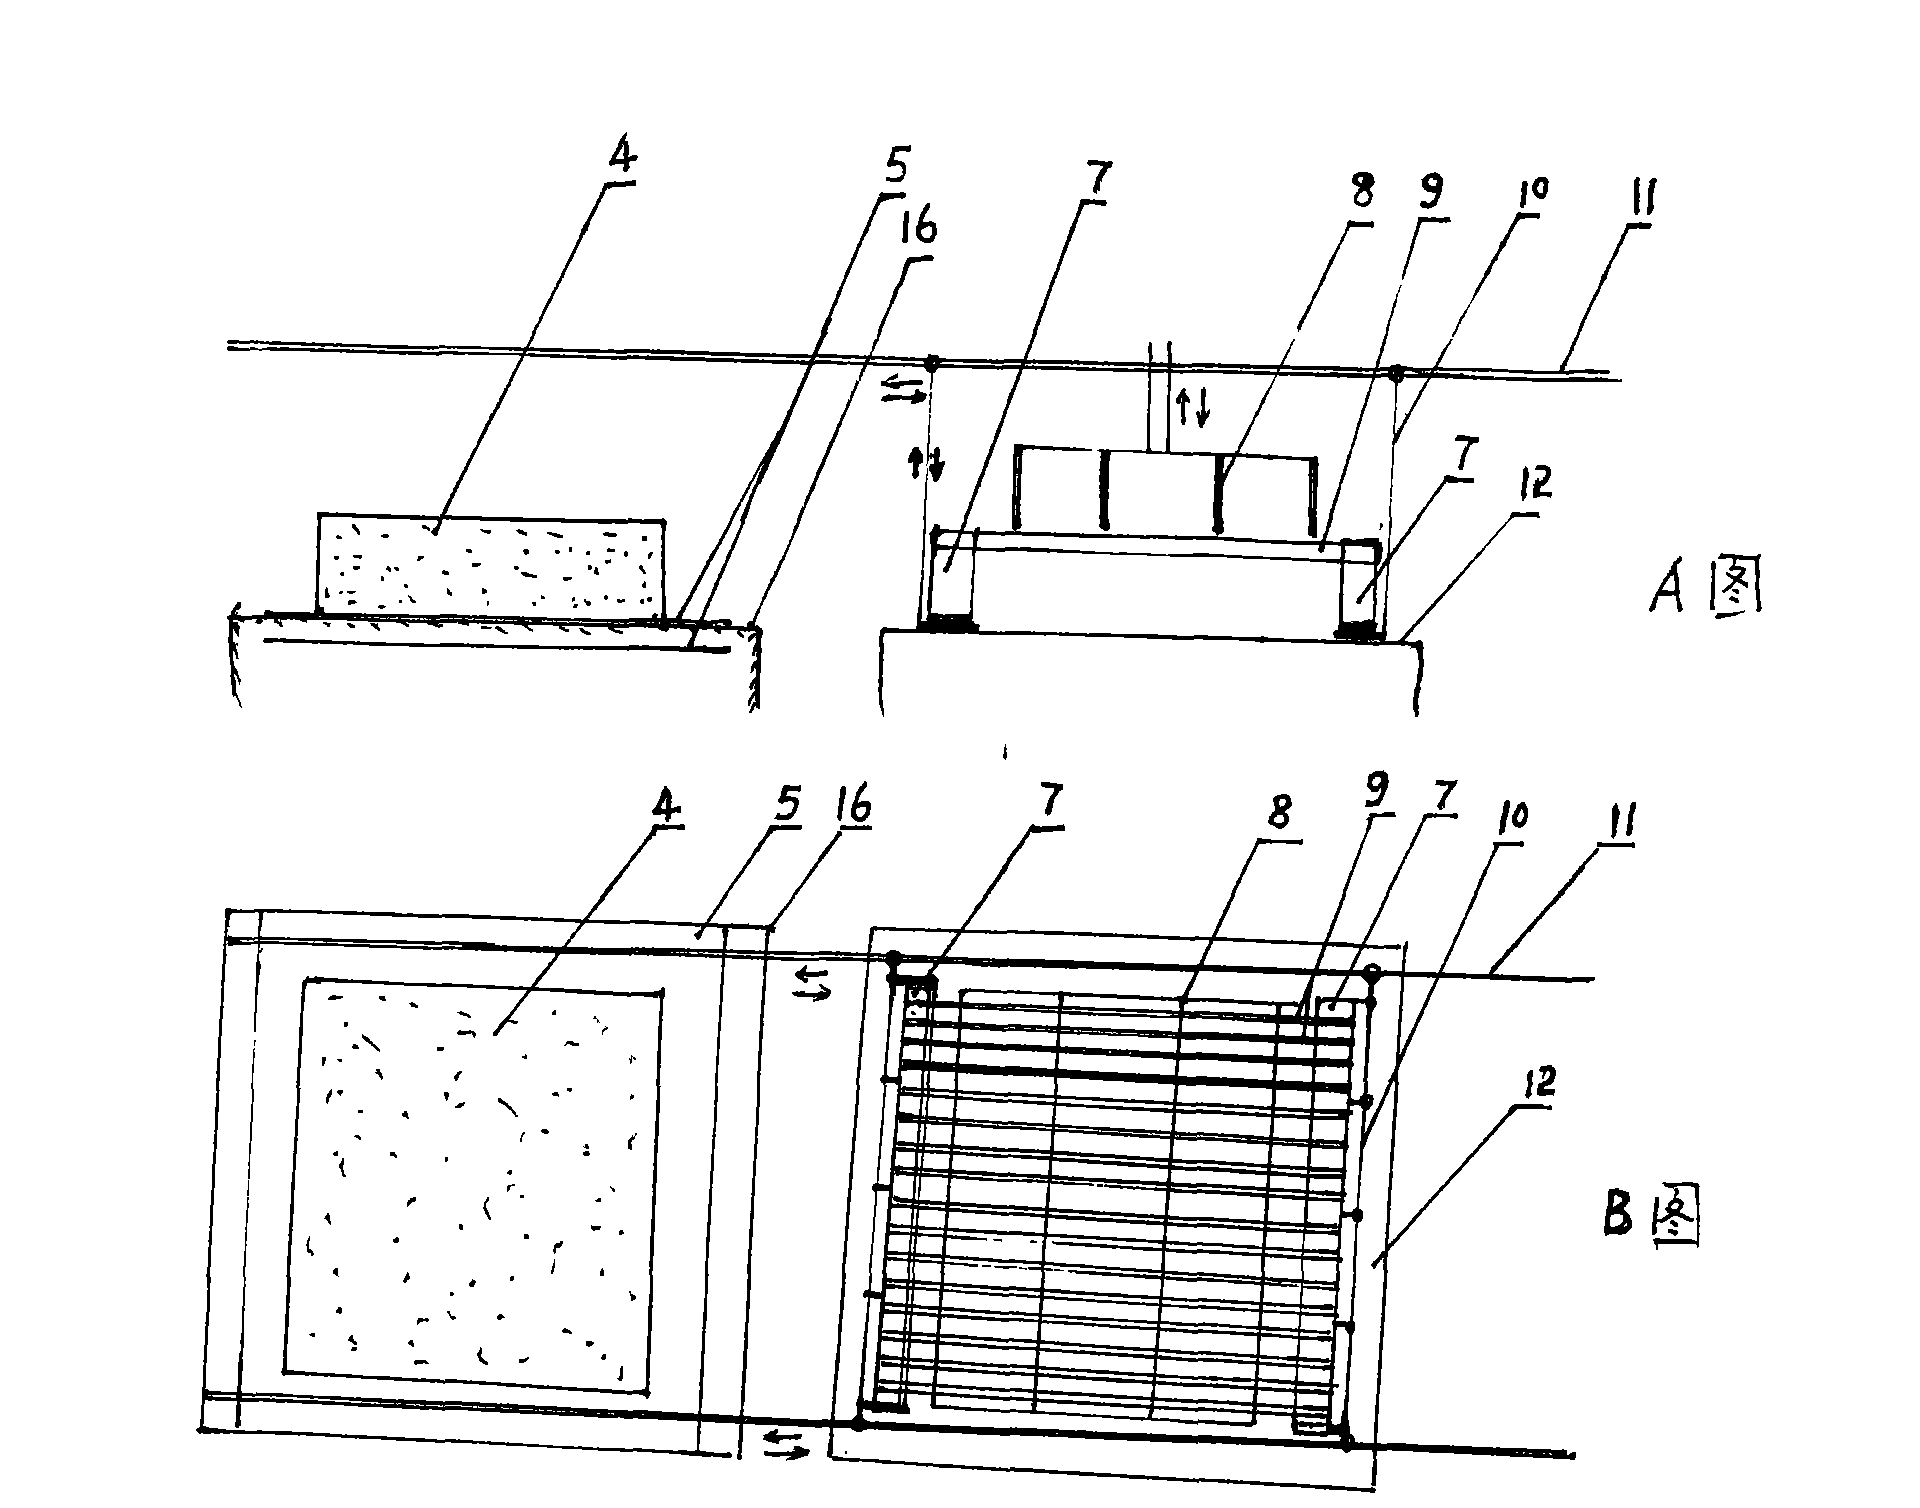 Method for manufacturing hollow medium density fiberboards and special equipment